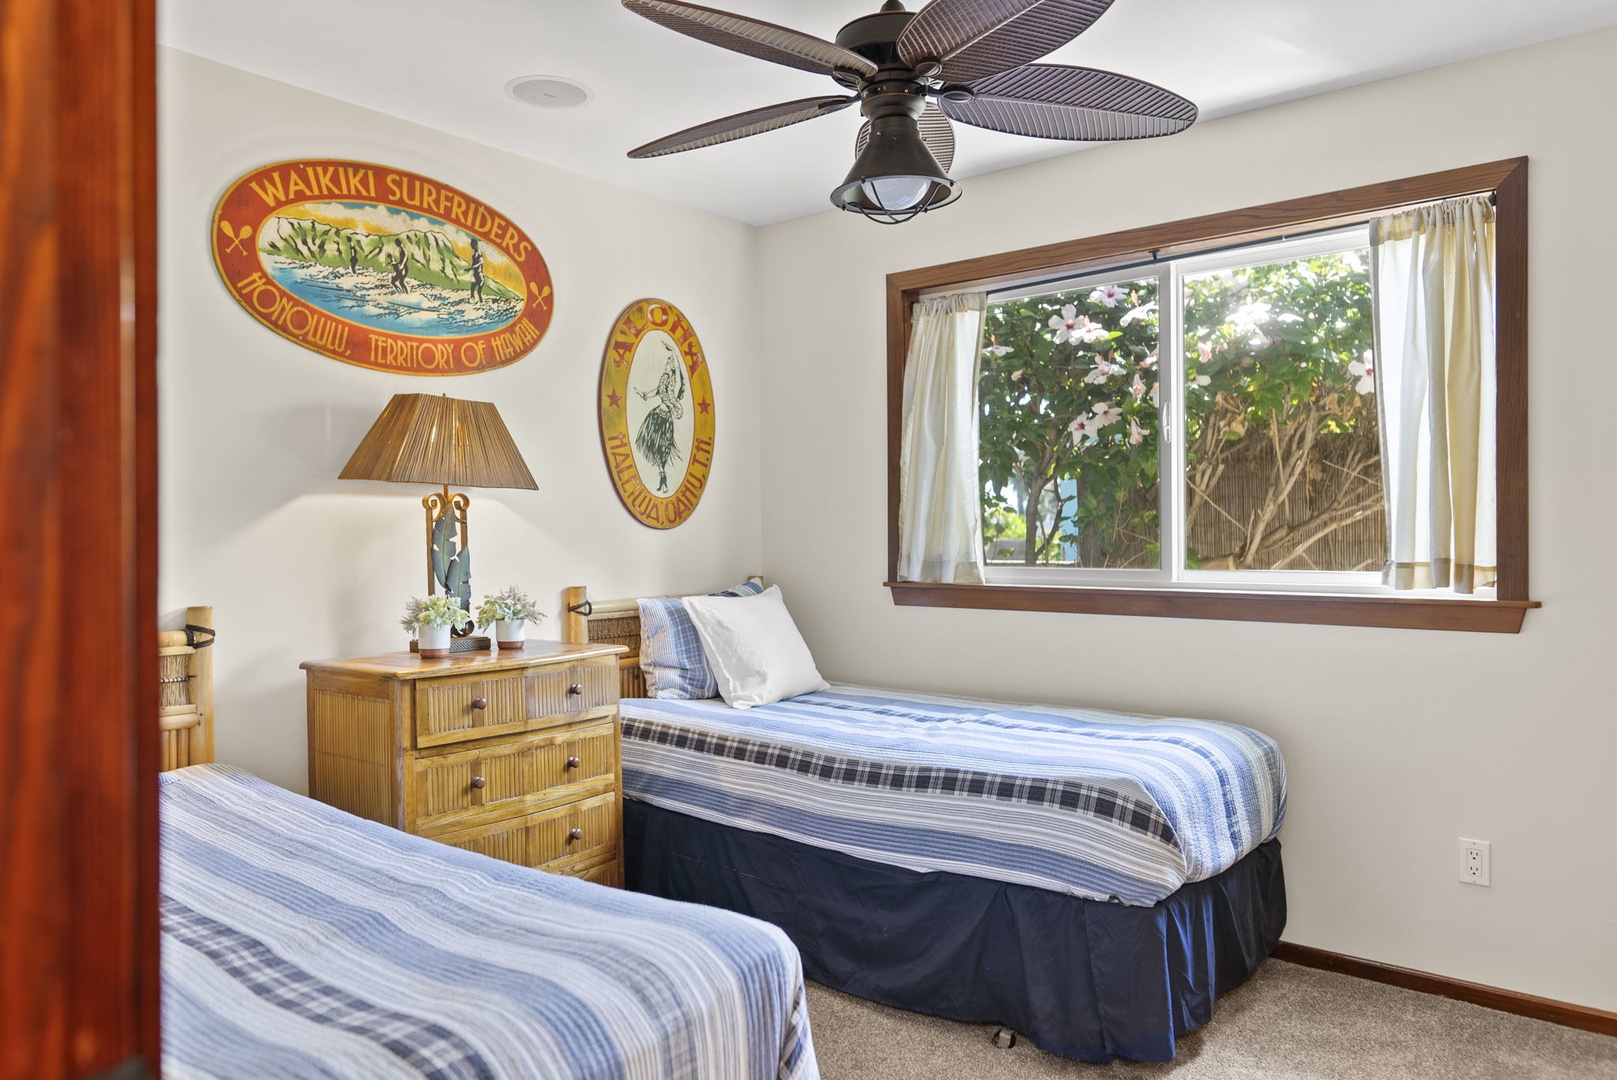 Waialua Vacation Rentals, Hale Oka Nunu - Also equipped with Split AC and a ceiling fan